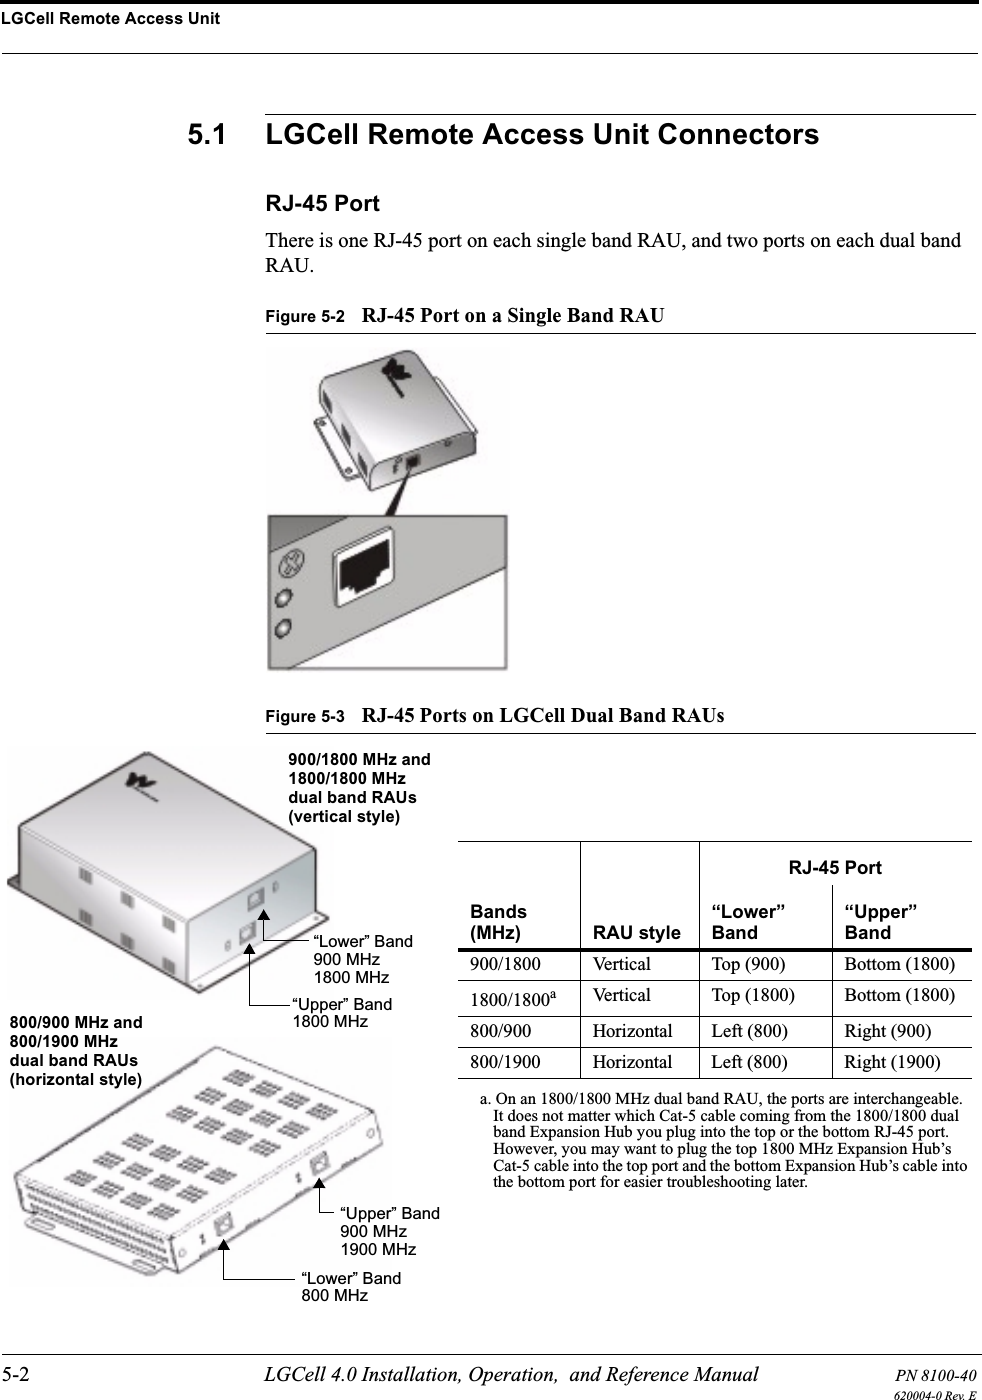 LGCell Remote Access Unit5-2 LGCell 4.0 Installation, Operation,  and Reference Manual PN 8100-40620004-0 Rev. E5.1 LGCell Remote Access Unit ConnectorsRJ-45 PortThere is one RJ-45 port on each single band RAU, and two ports on each dual band RAU.Figure 5-2 RJ-45 Port on a Single Band RAUFigure 5-3 RJ-45 Ports on LGCell Dual Band RAUs1800 MHz1800 MHz900 MHz800/900 MHz anddual band RAUs800/1900 MHz900/1800 MHz anddual band RAUs1800/1800 MHz(vertical style)(horizontal style)“Lower” Band“Upper” Band800 MHz“Lower” Band900 MHz“Upper” Band1900 MHzBands (MHz) RAU styleRJ-45 Port“Lower” Band“Upper” Band900/1800 Vertical Top (900) Bottom (1800)1800/1800aa. On an 1800/1800 MHz dual band RAU, the ports are interchangeable. It does not matter which Cat-5 cable coming from the 1800/1800 dual band Expansion Hub you plug into the top or the bottom RJ-45 port. However, you may want to plug the top 1800 MHz Expansion Hub’s Cat-5 cable into the top port and the bottom Expansion Hub’s cable into the bottom port for easier troubleshooting later.Vertical Top (1800) Bottom (1800)800/900 Horizontal Left (800) Right (900)800/1900 Horizontal Left (800) Right (1900)